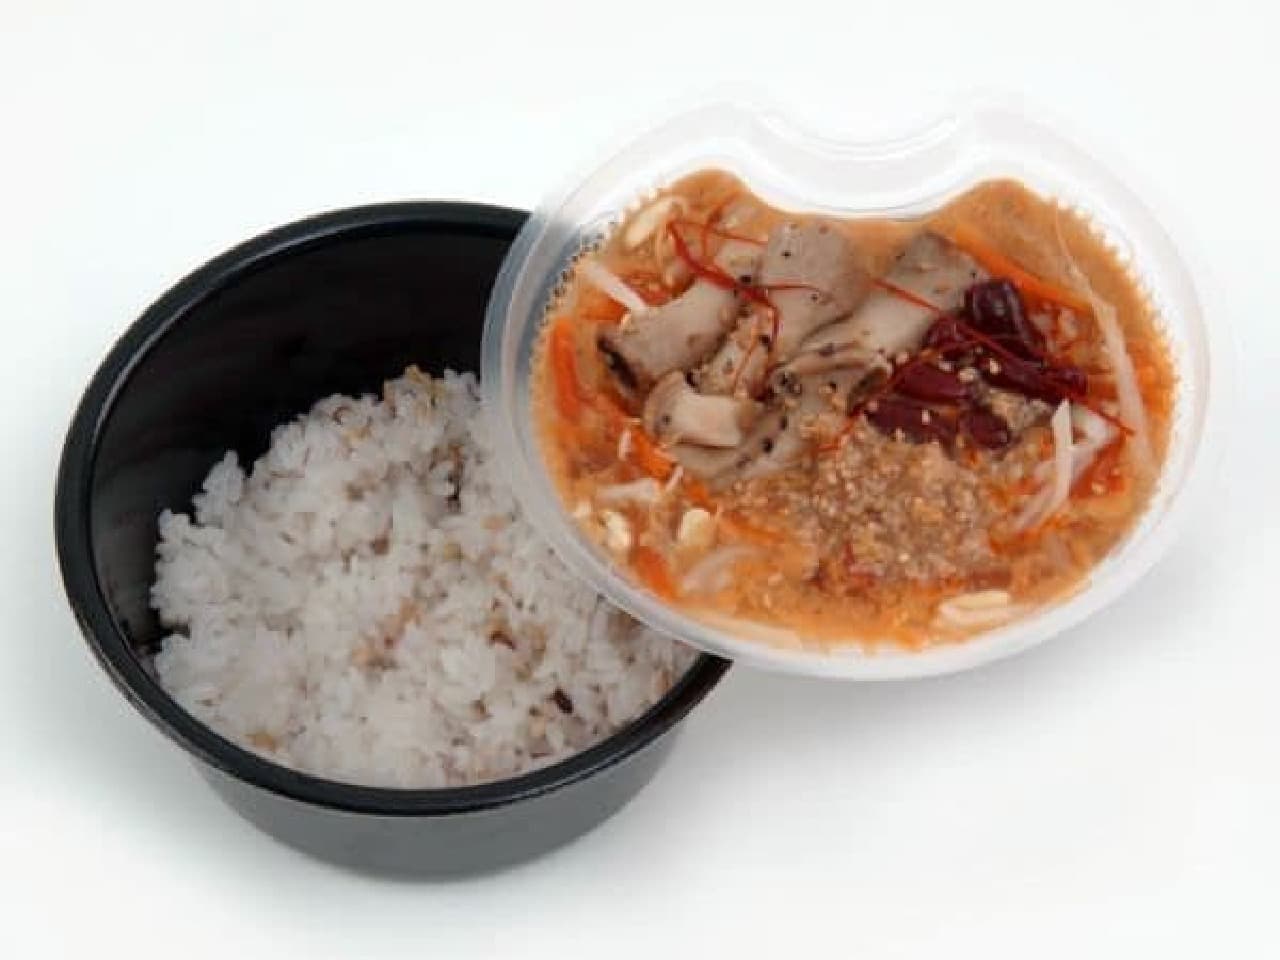 "Aoyama rice" in October is mountain food and mushrooms! -Released from Ministop